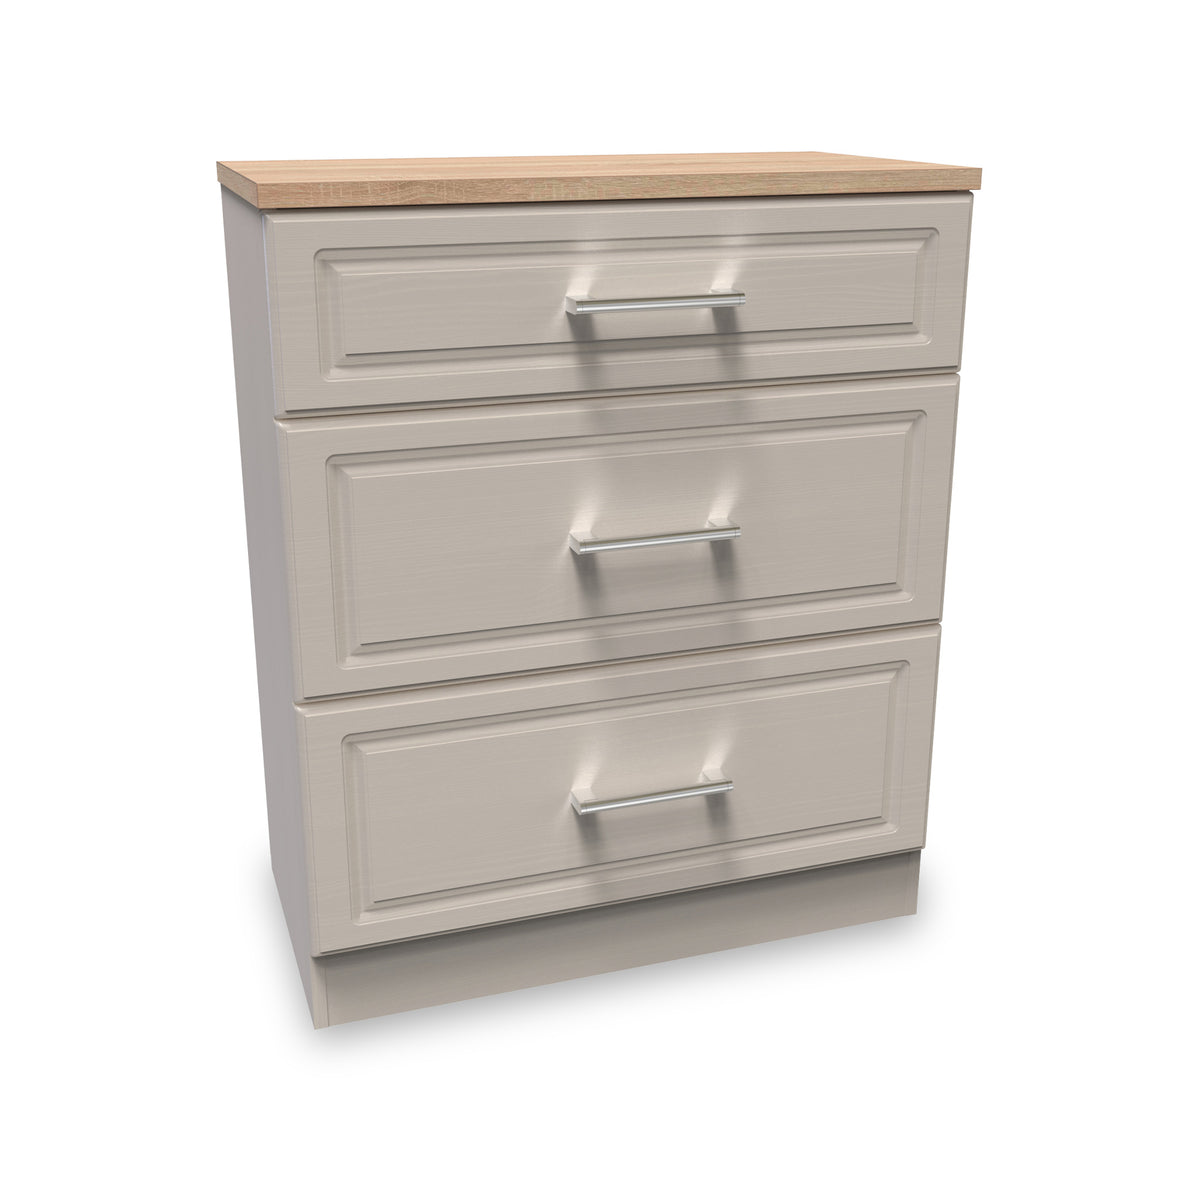 Talland Ash 3 Drawer Deep Chest by Roseland Furniture